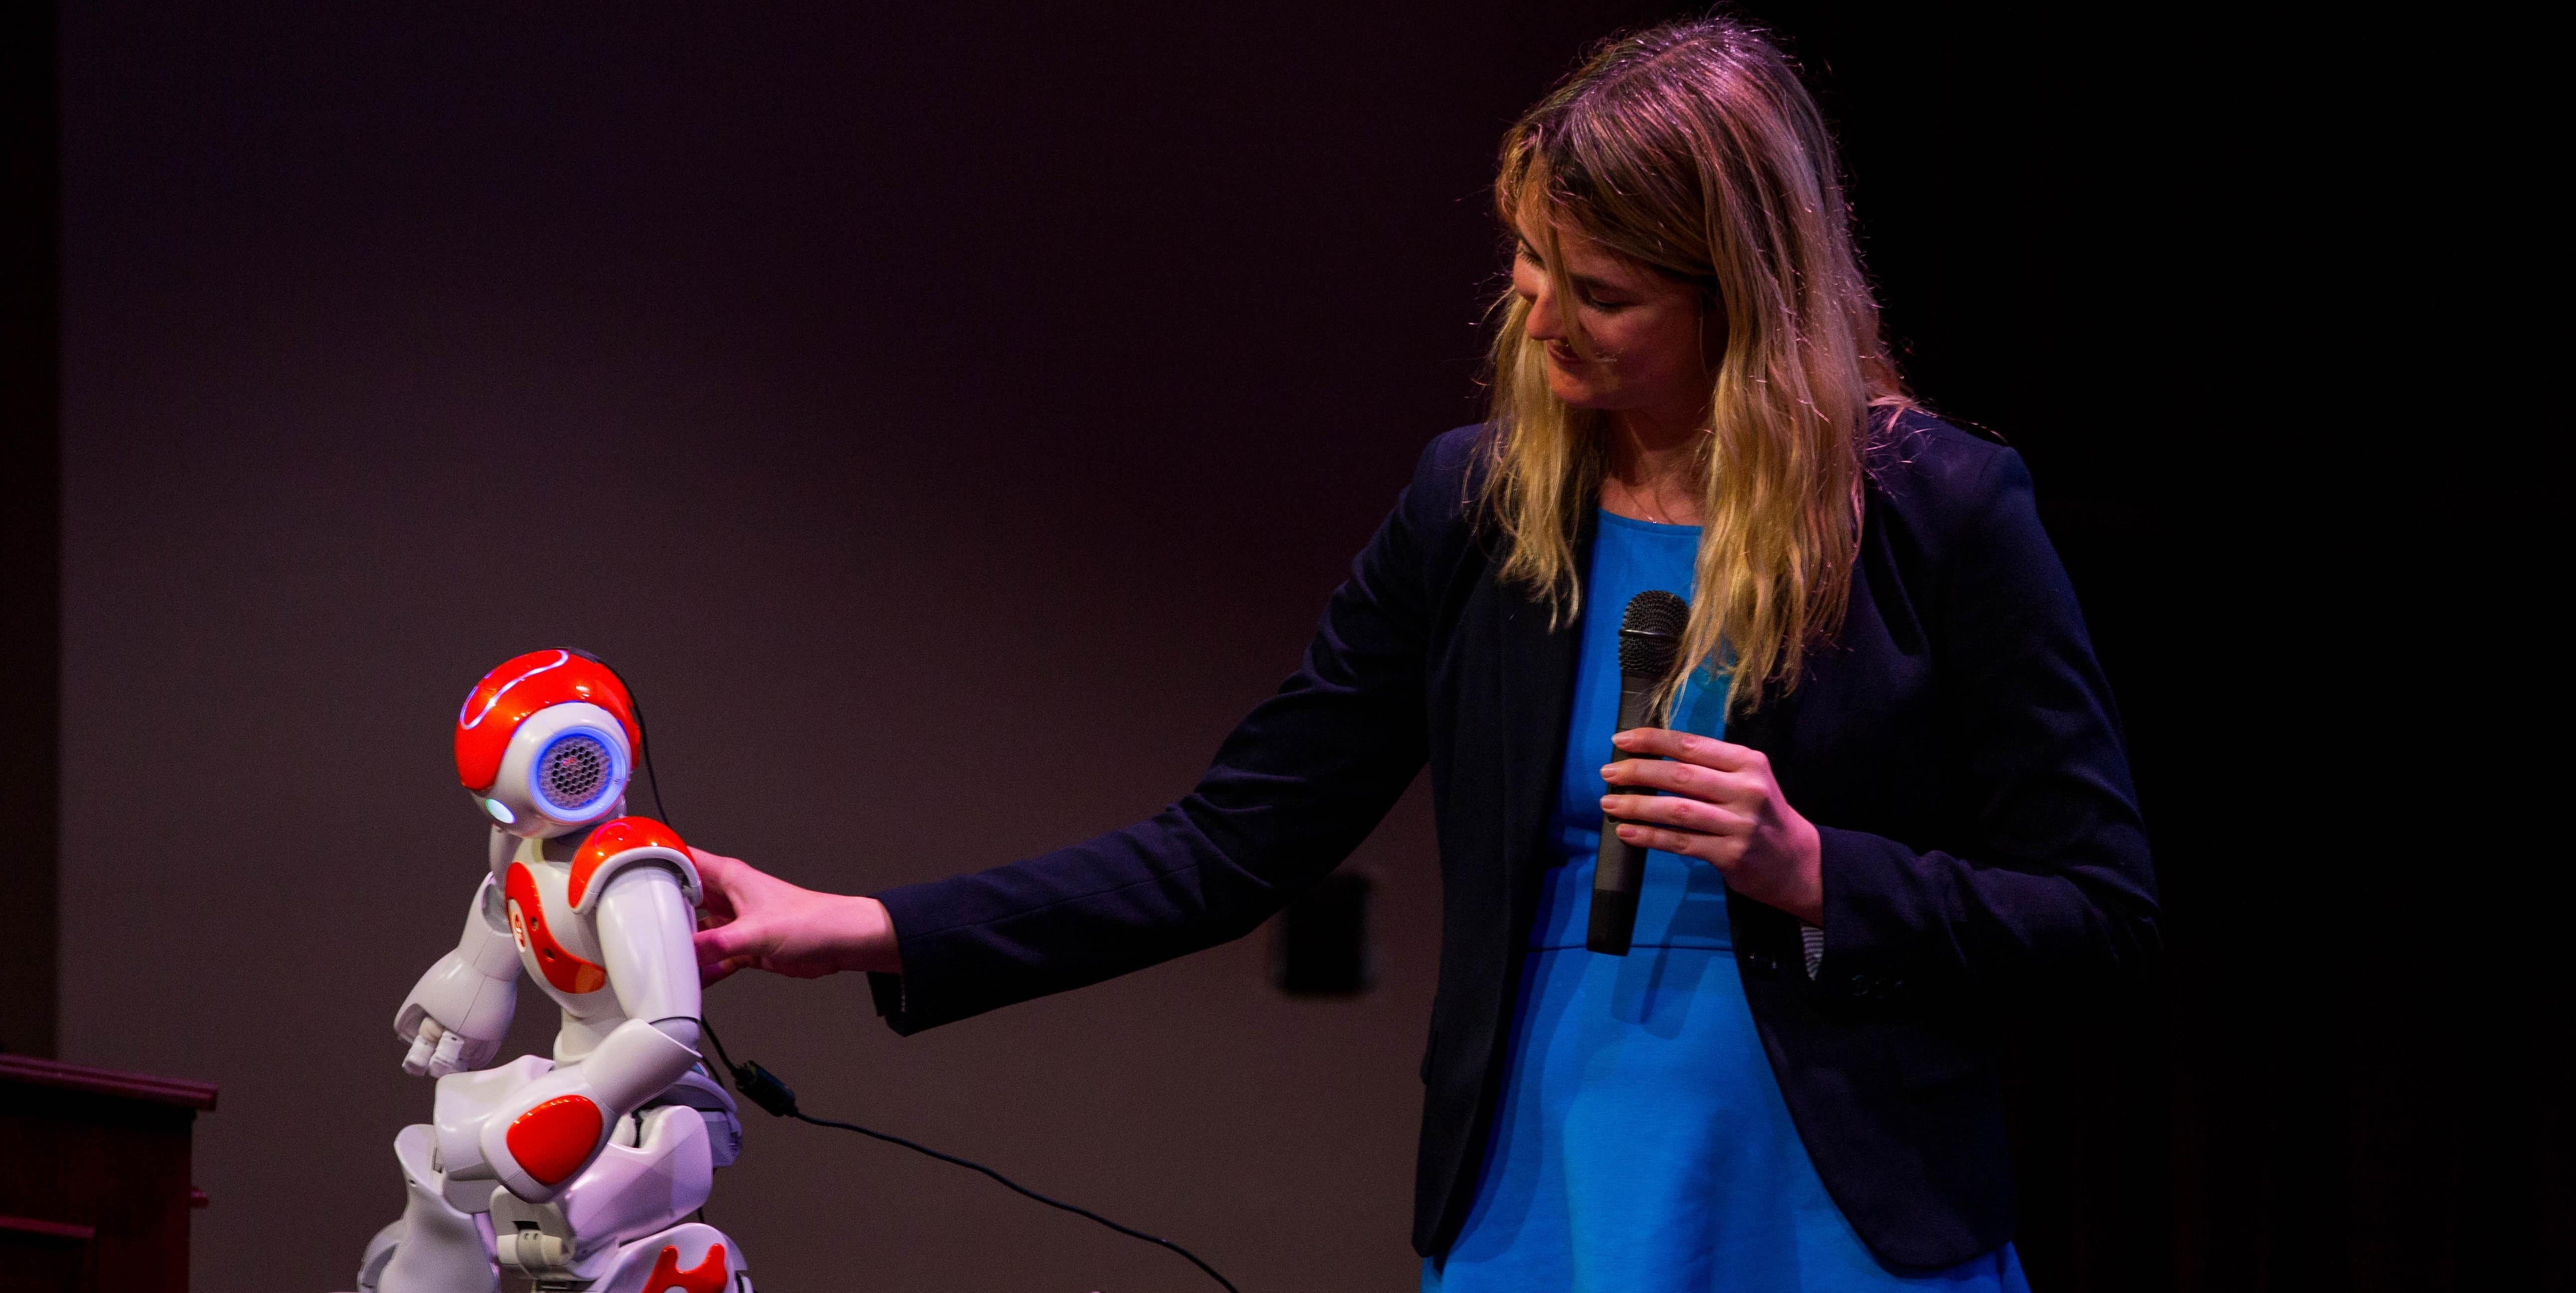 A woman holding a microphone affectionately touches a small robot.